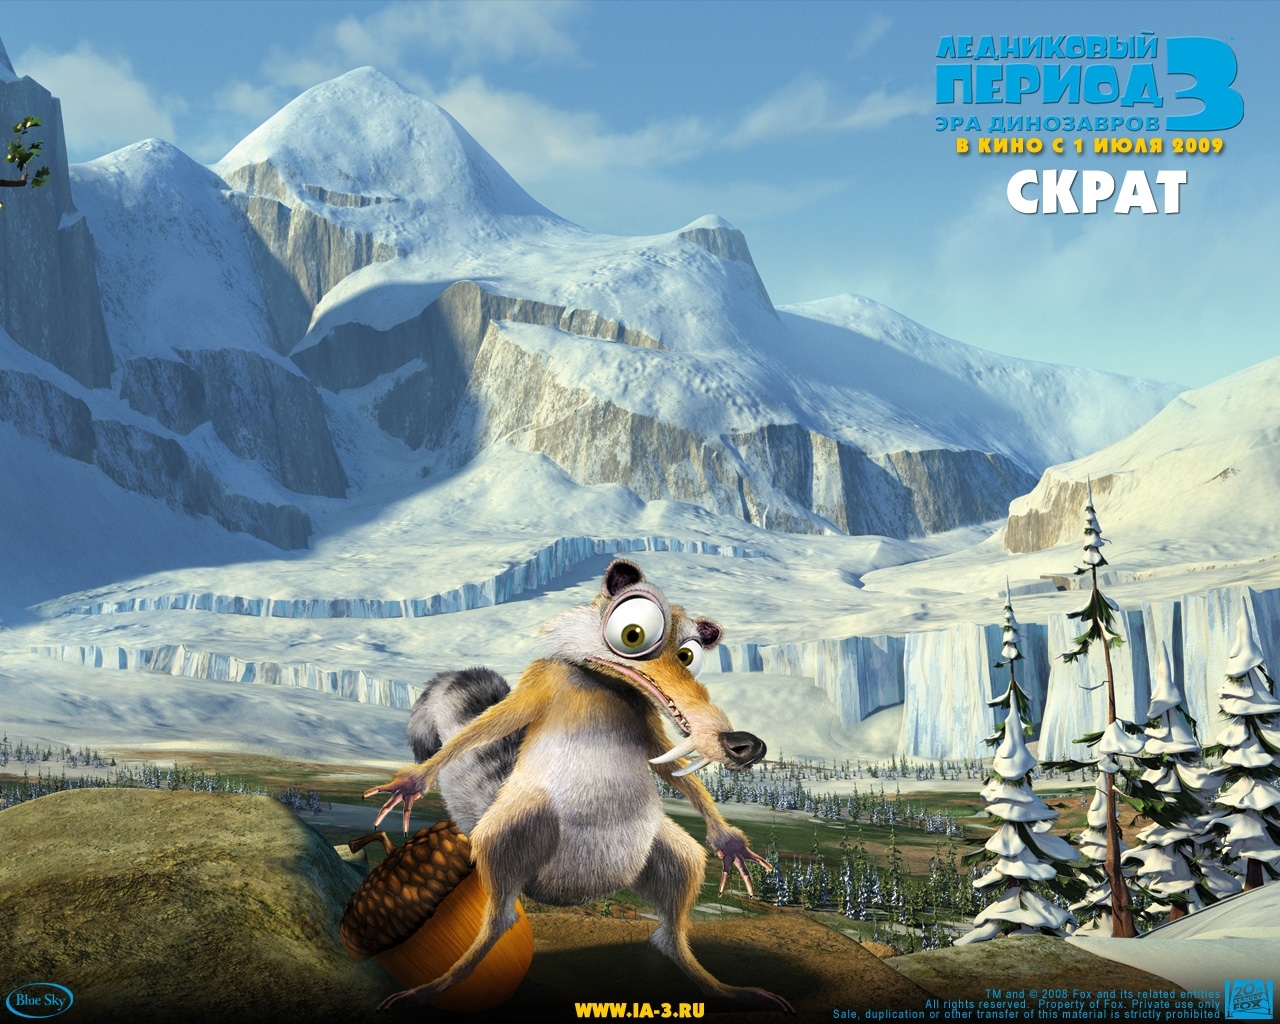 8k Ice Age Images